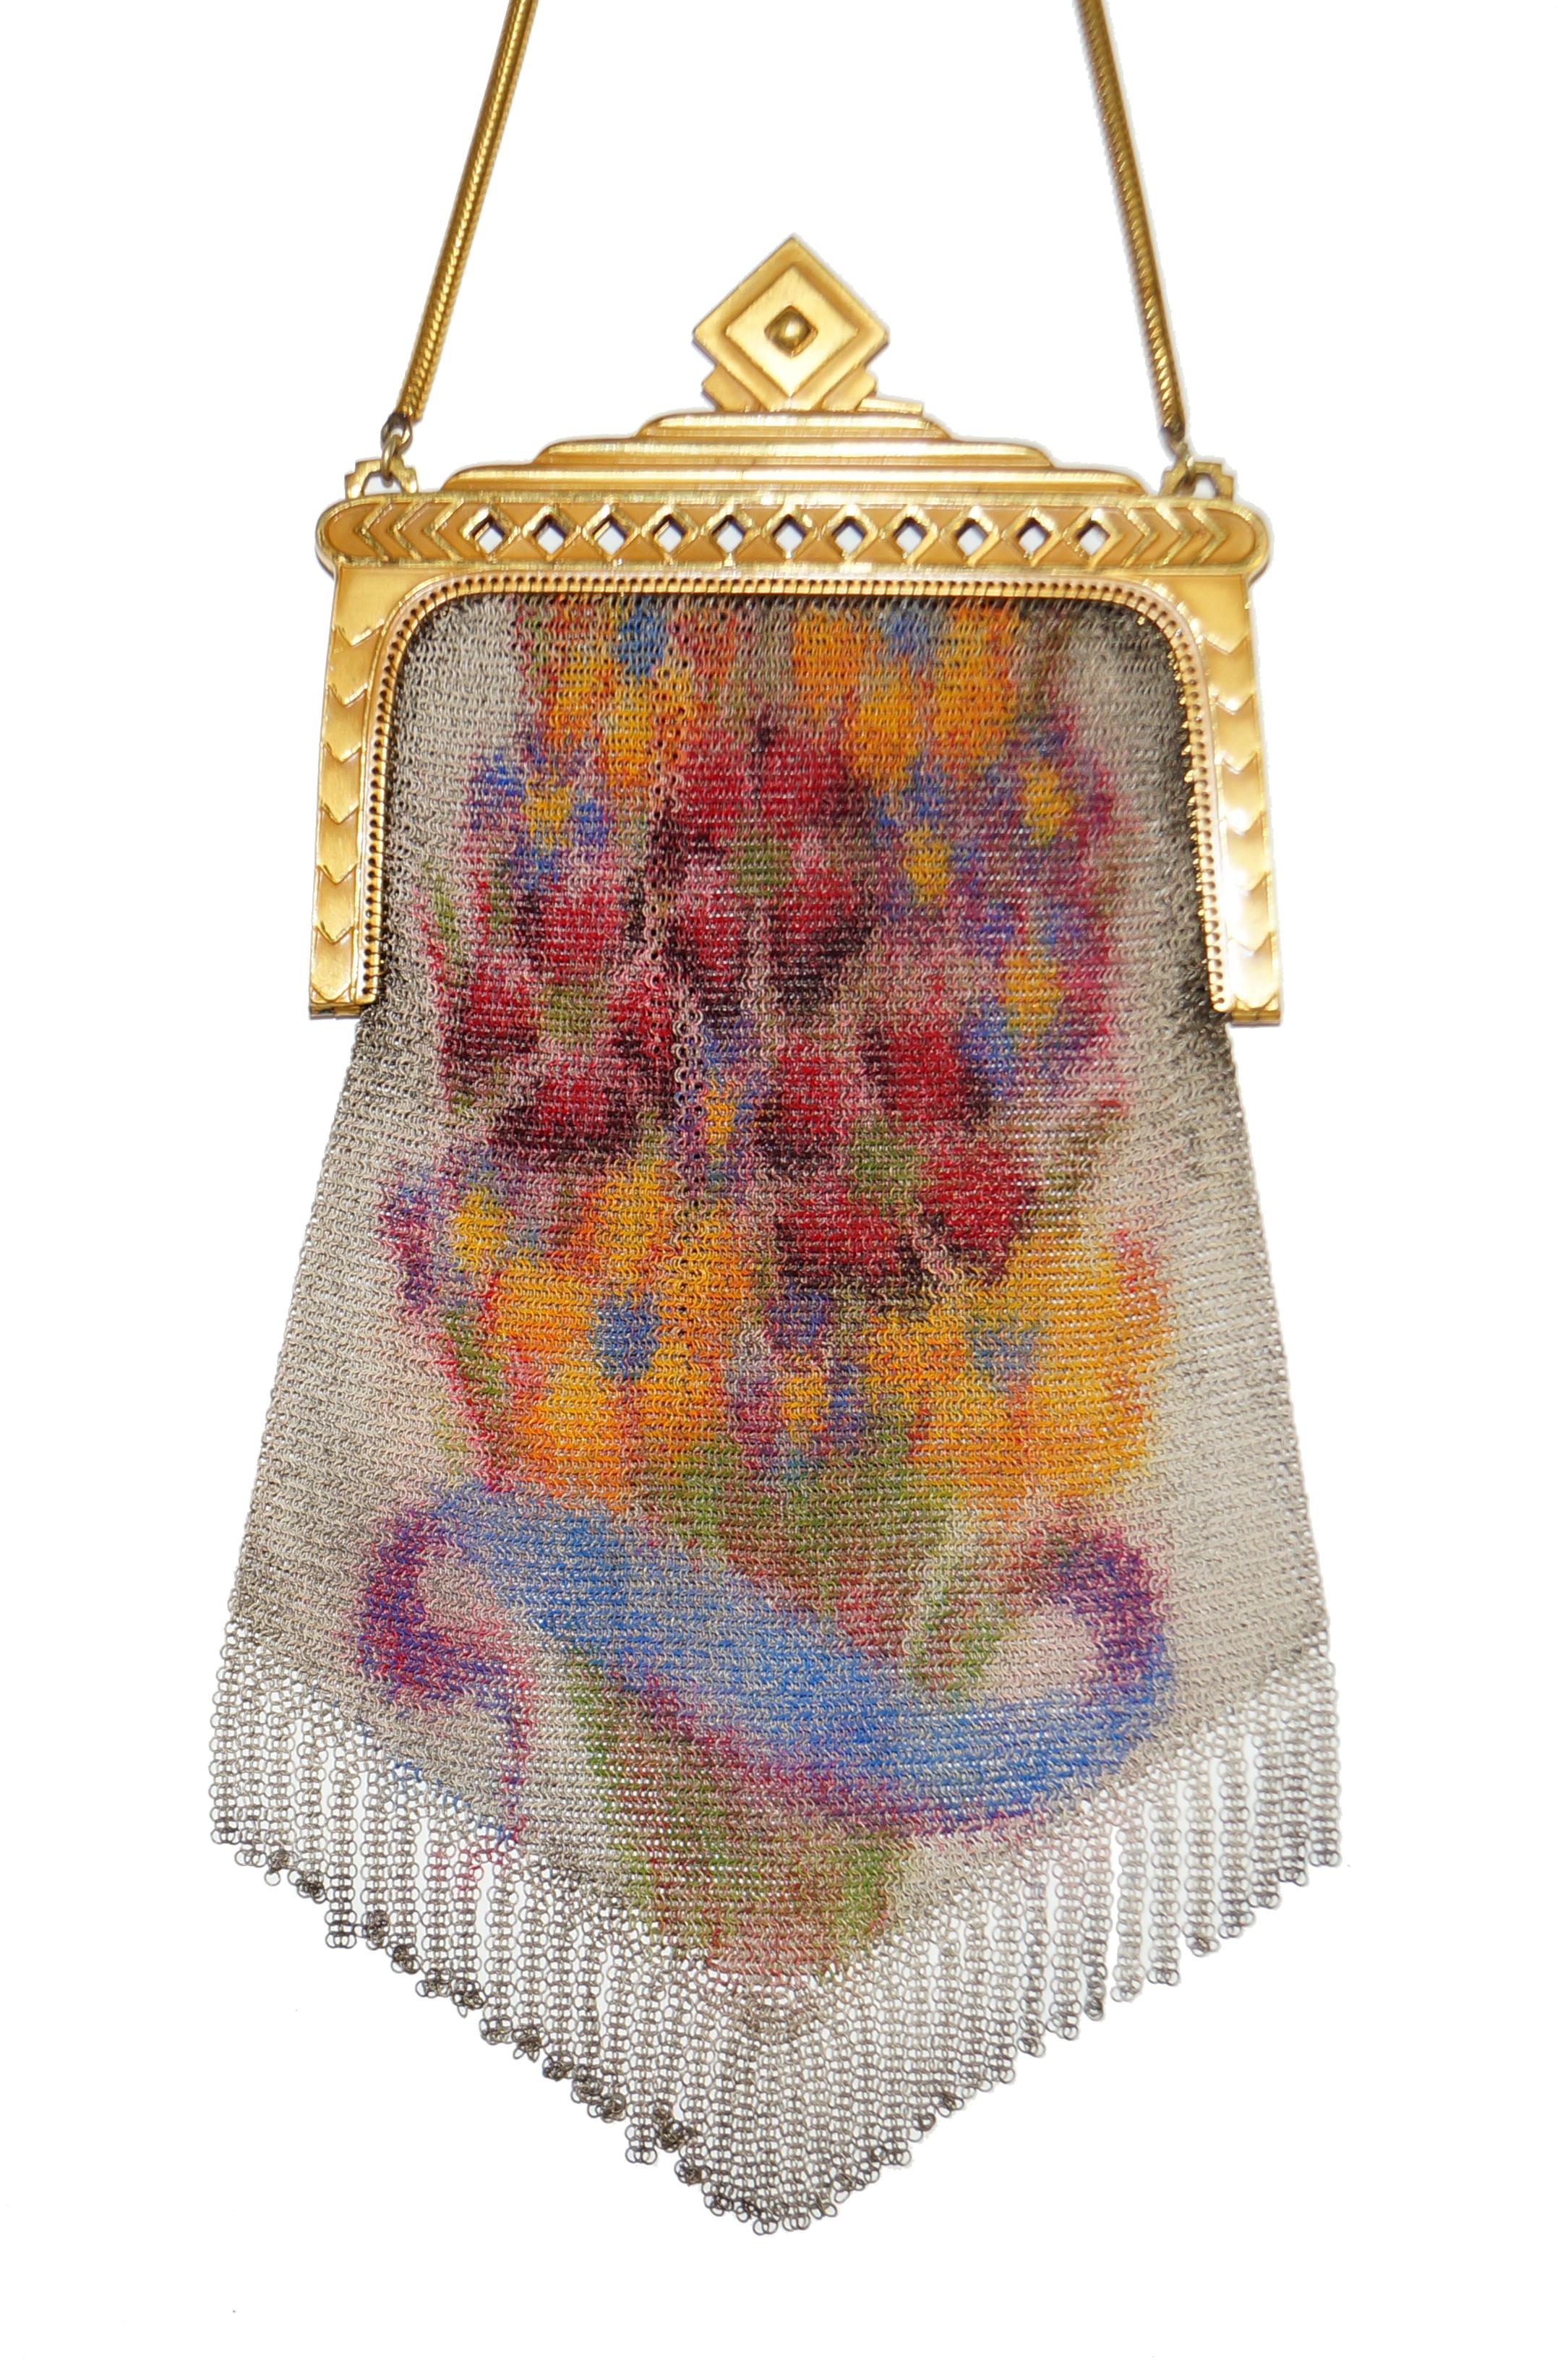 Stunning floral thin Dresden mesh evening bag by Whiting & Davis. This elegant and elaborate 1920s evening purse has a diamond art deco clasp with pressed out details. The mesh body of the purse features a floral bouquet design with orange tipped